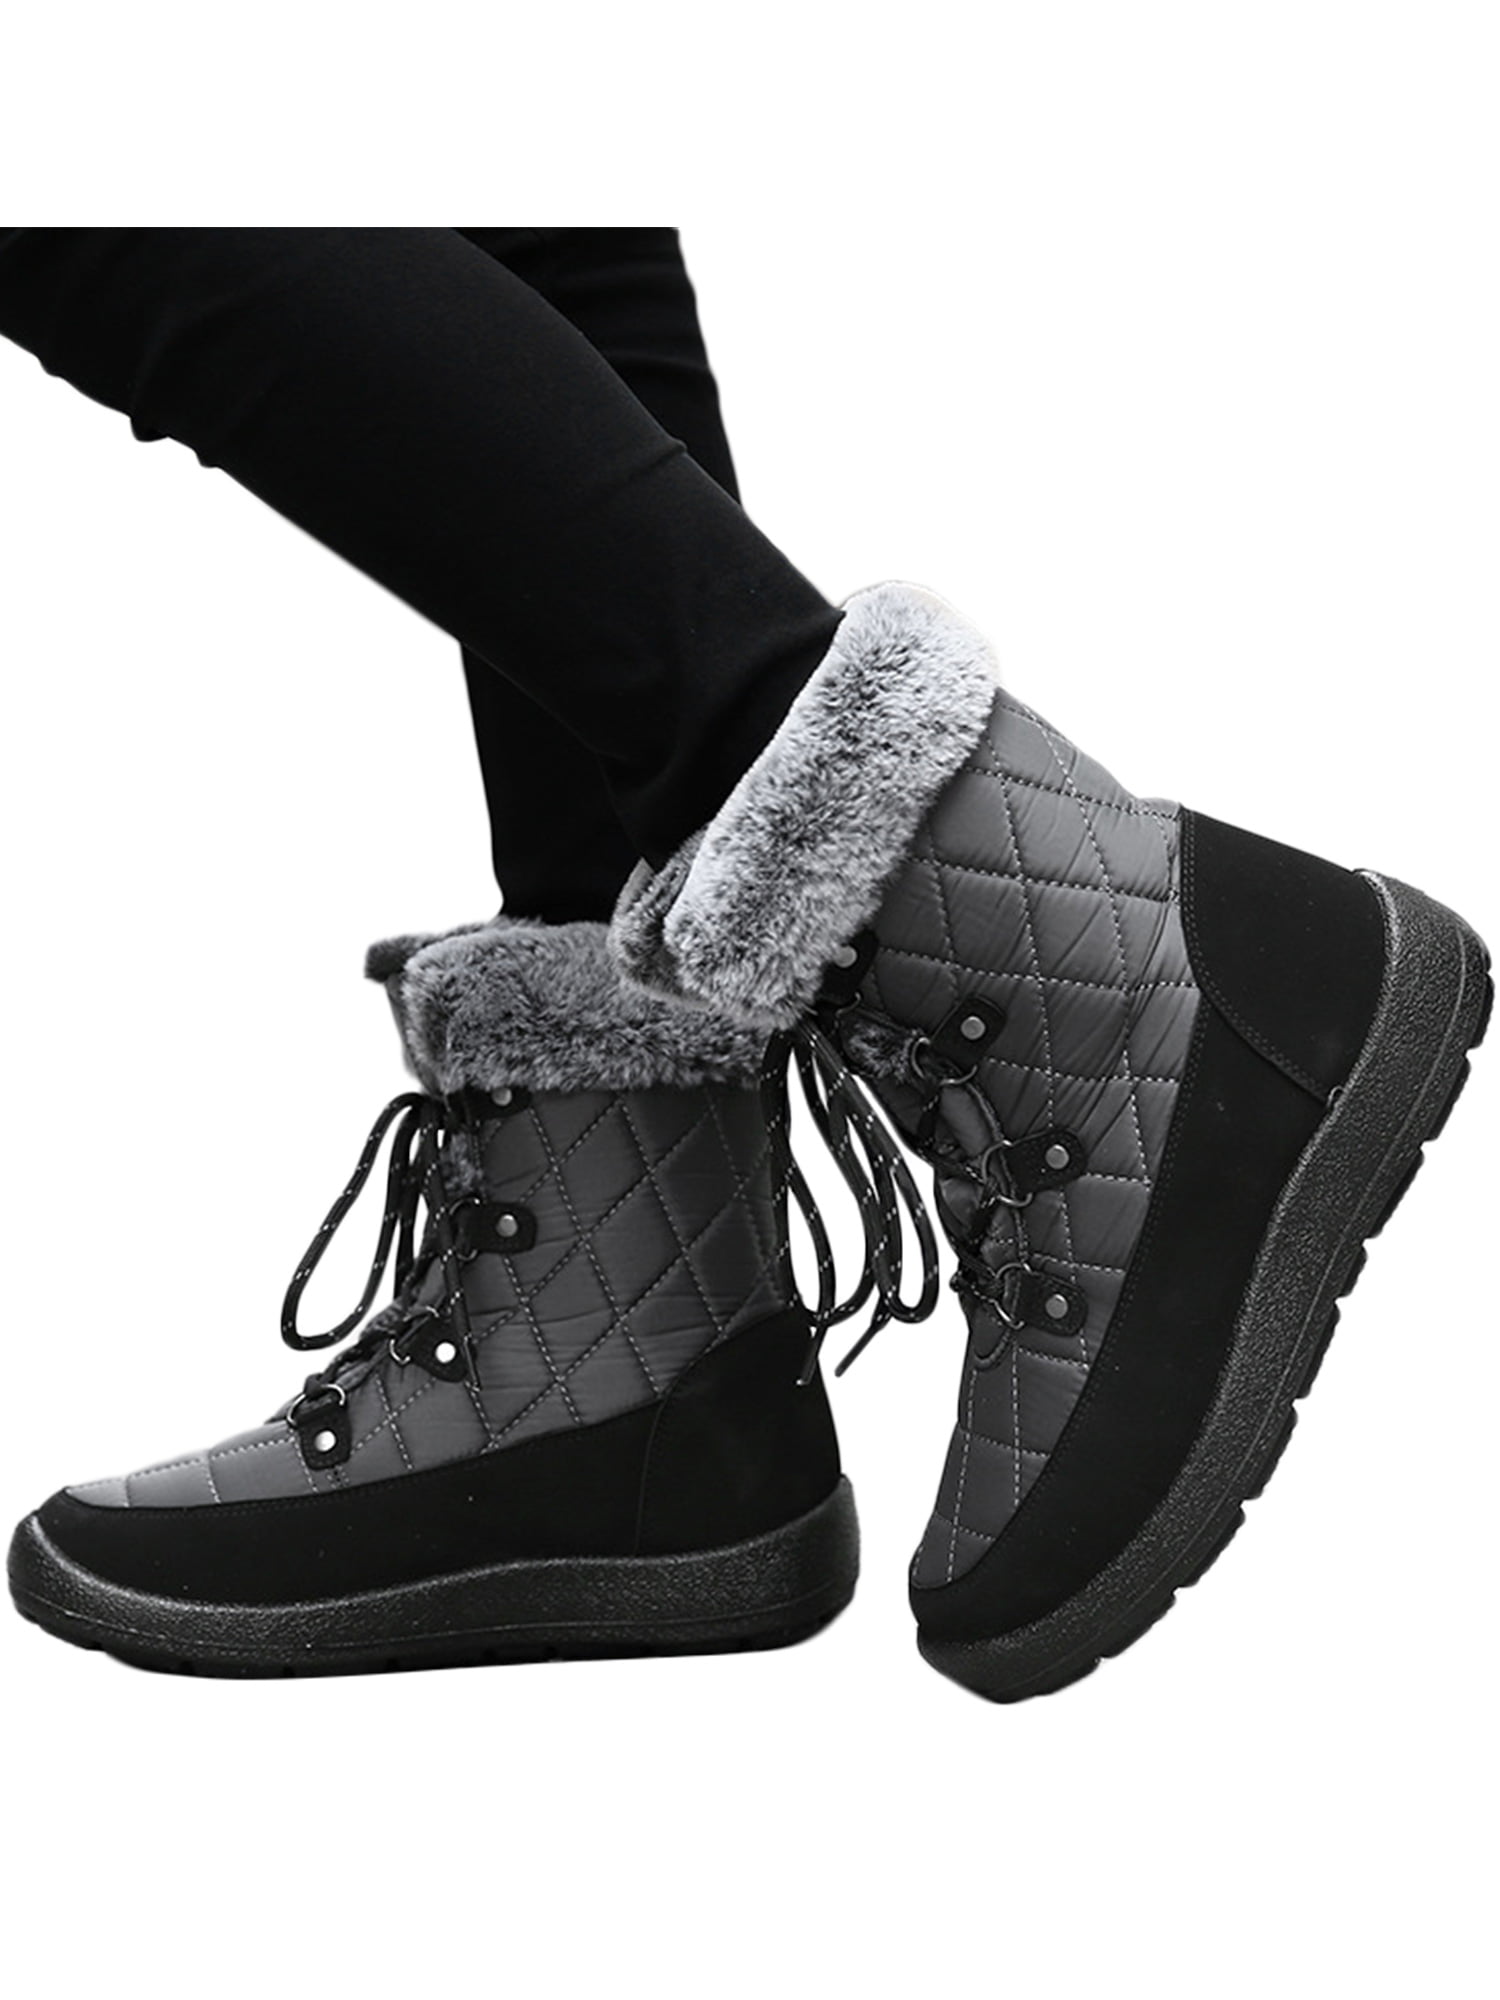 Ankle Winter Snow Boots Casual Laces Up Plush Warm Shoes for Womens